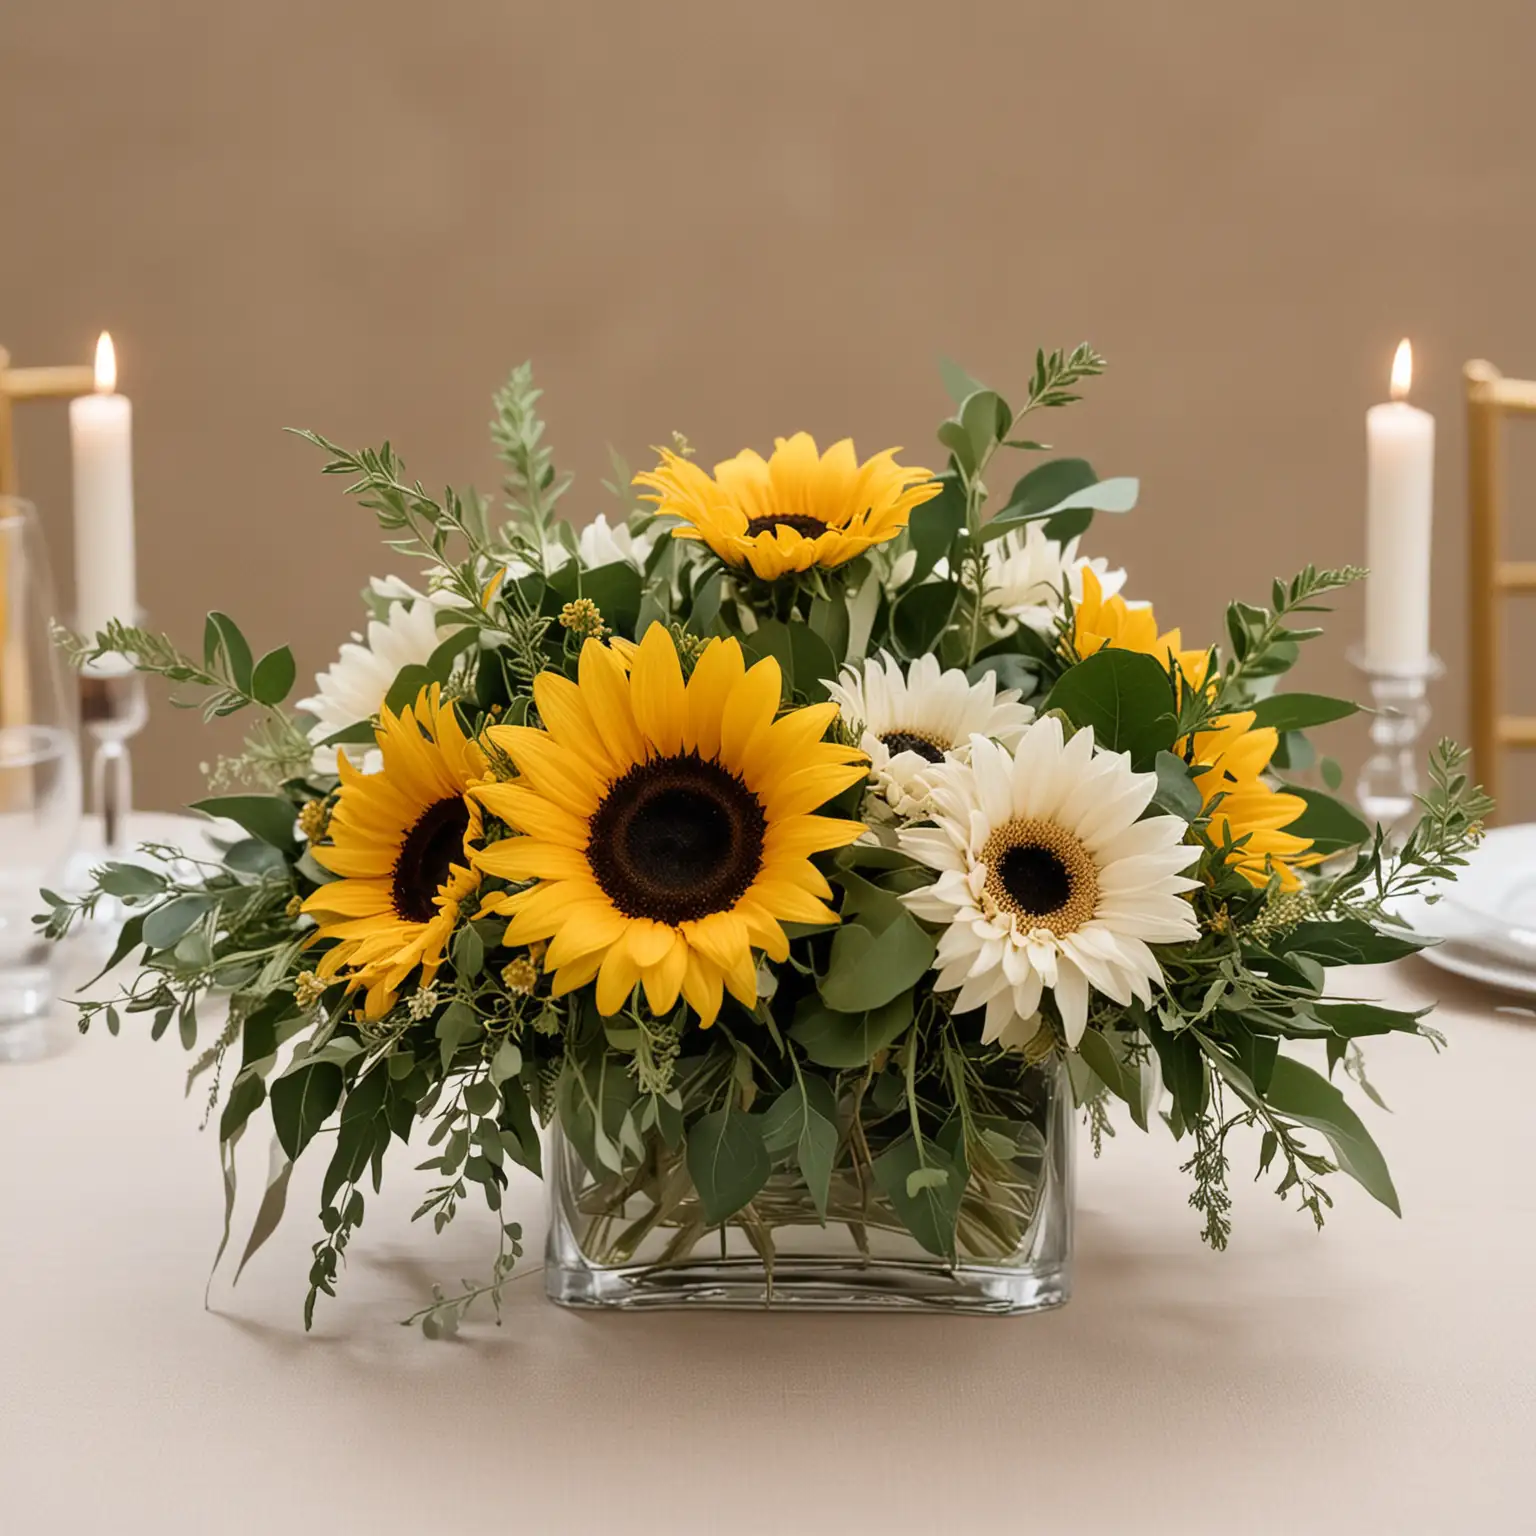 Intimate-Wedding-Centerpiece-with-Sunflowers-and-Greenery